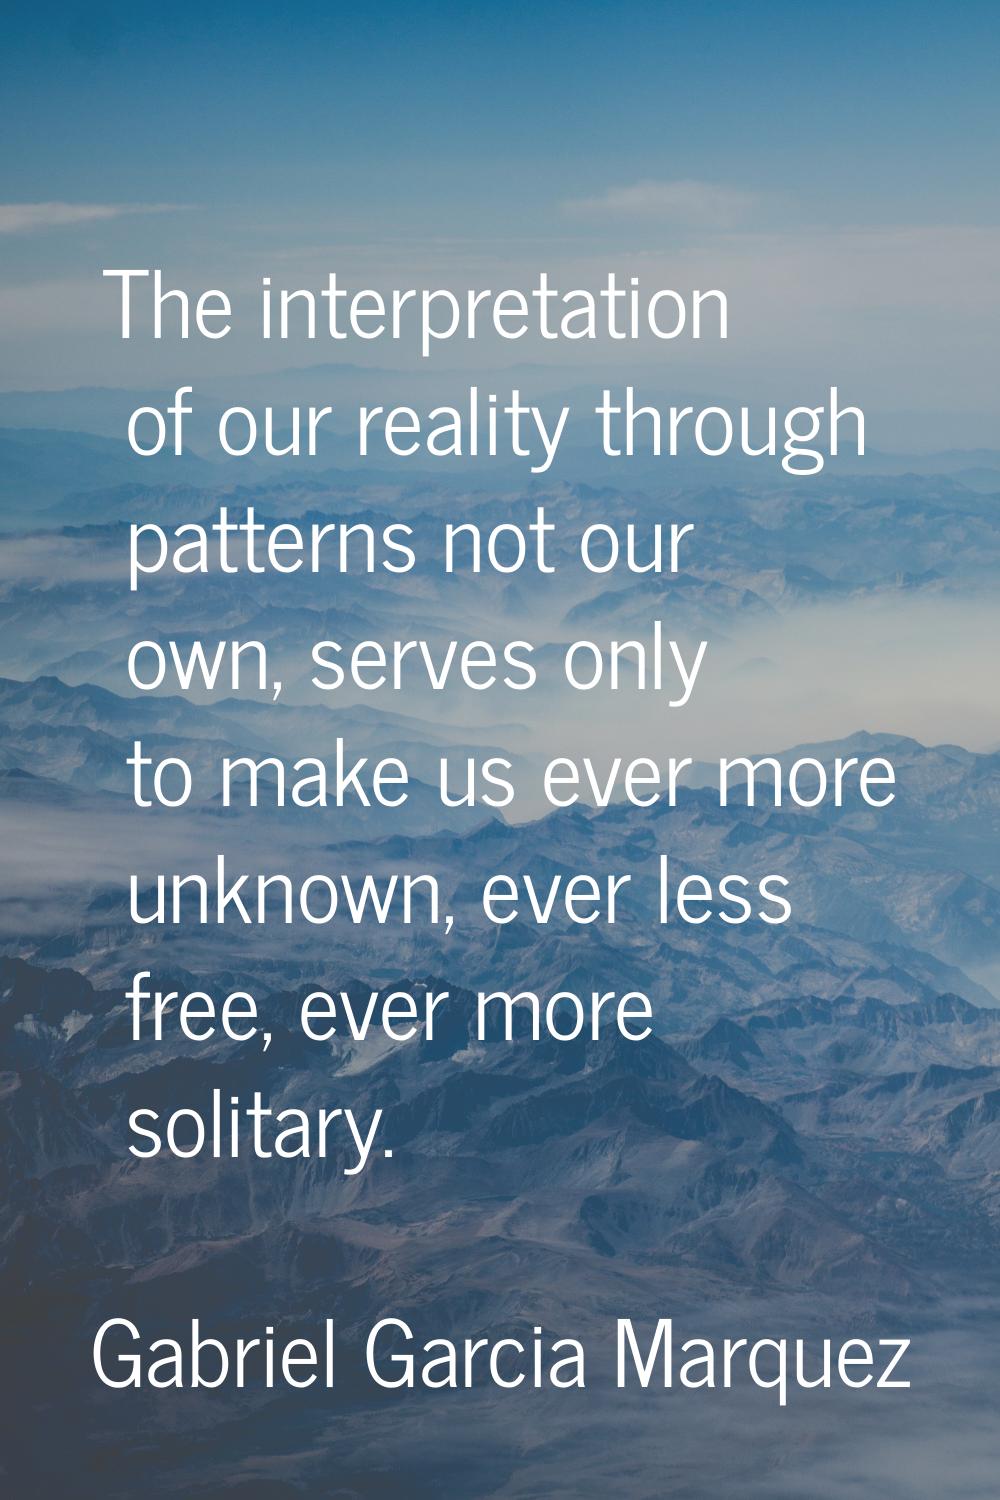 The interpretation of our reality through patterns not our own, serves only to make us ever more un